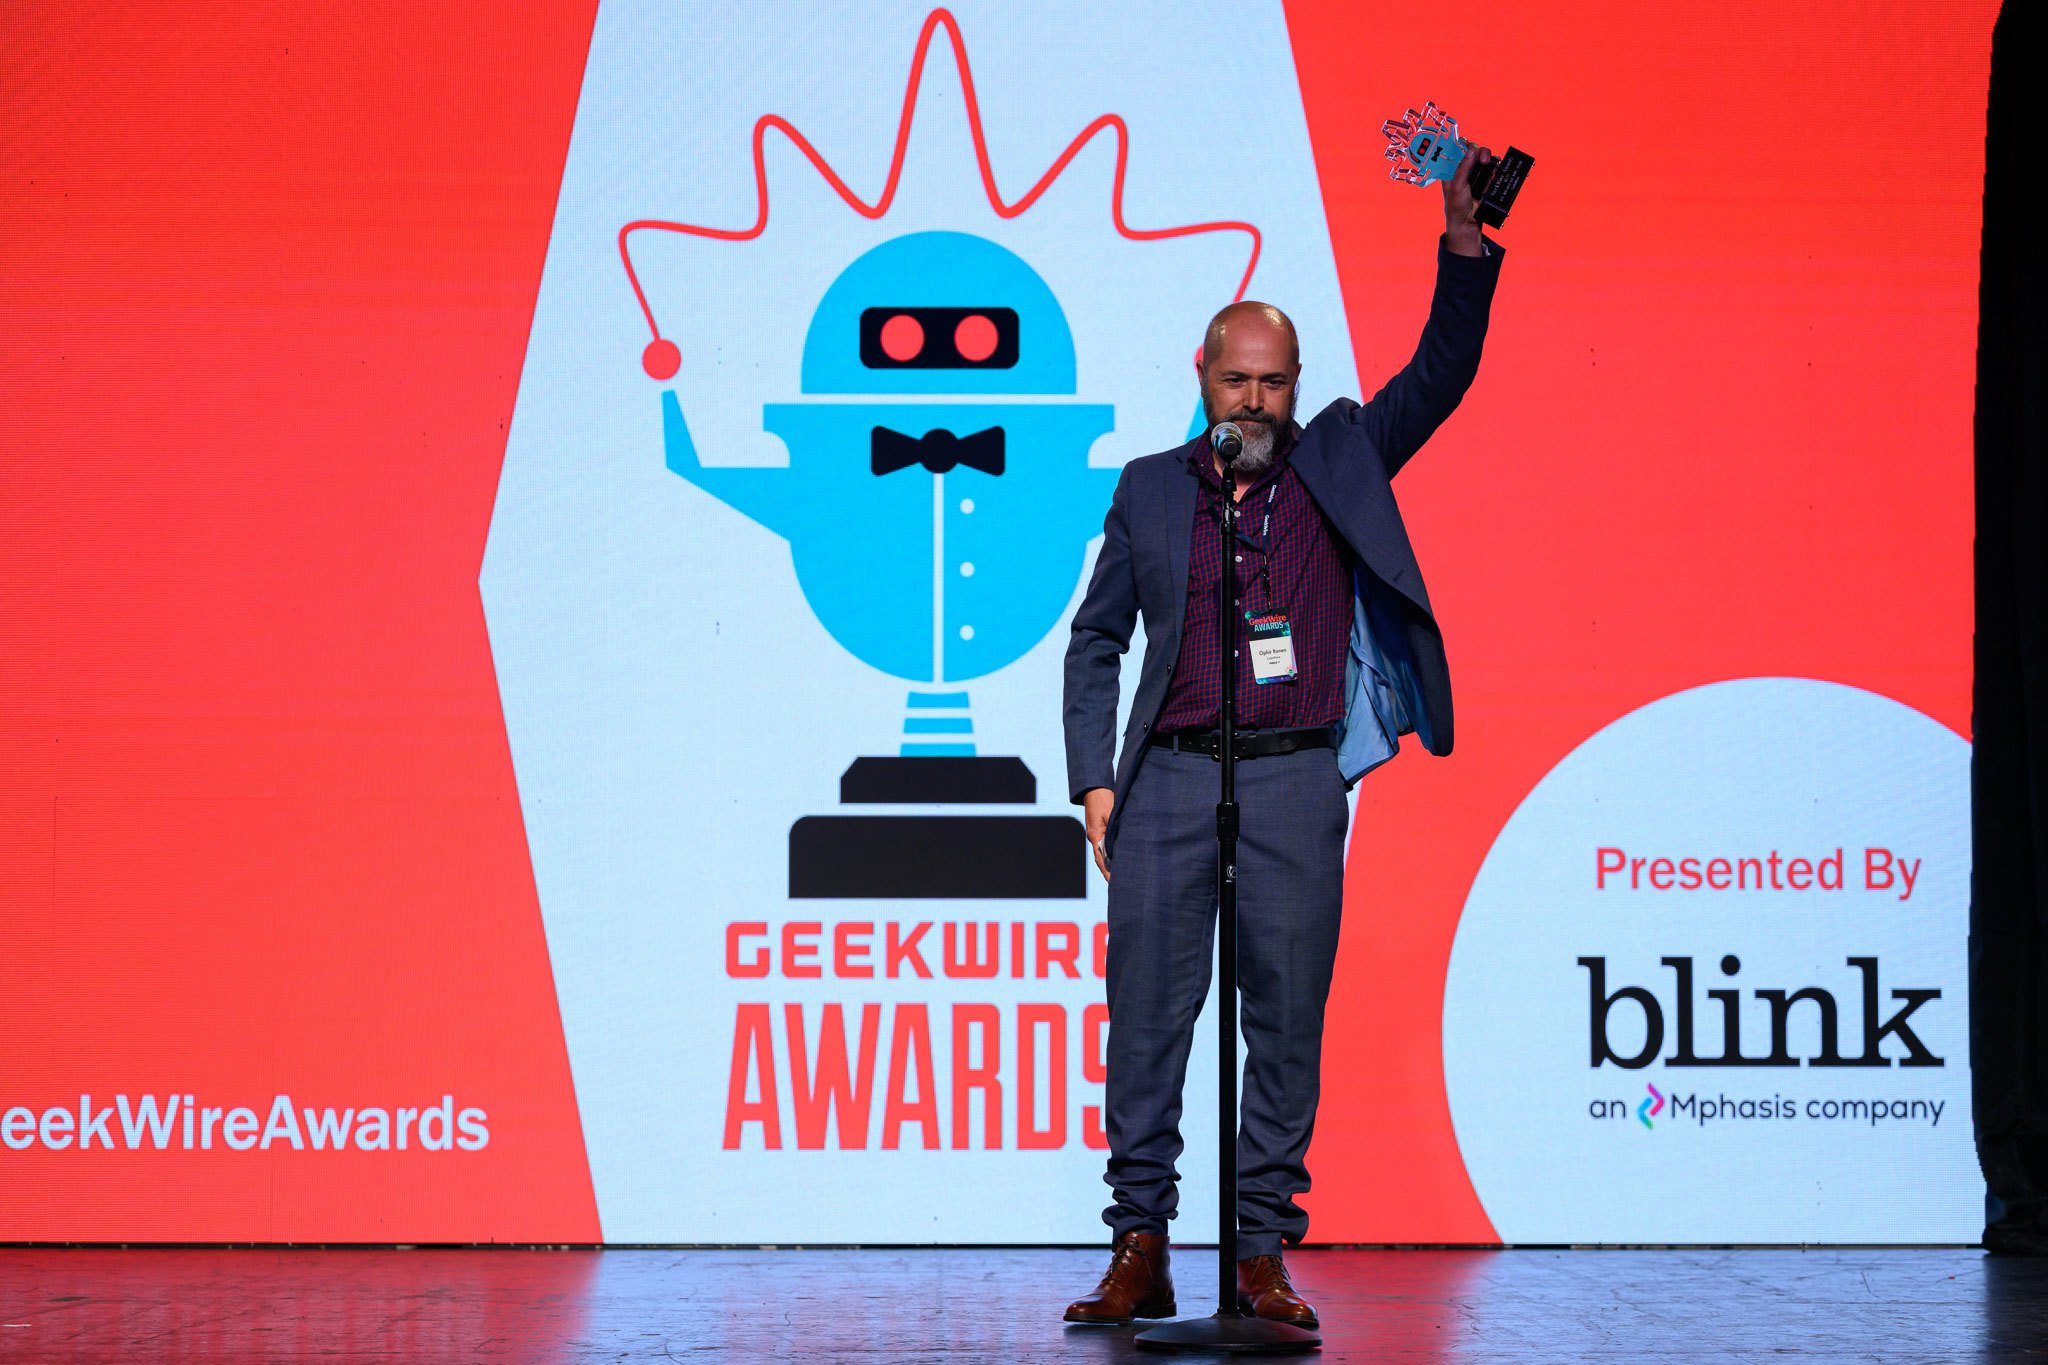 CalmWave wins GeekWire Award for UX Design of the Year, presented by Blink